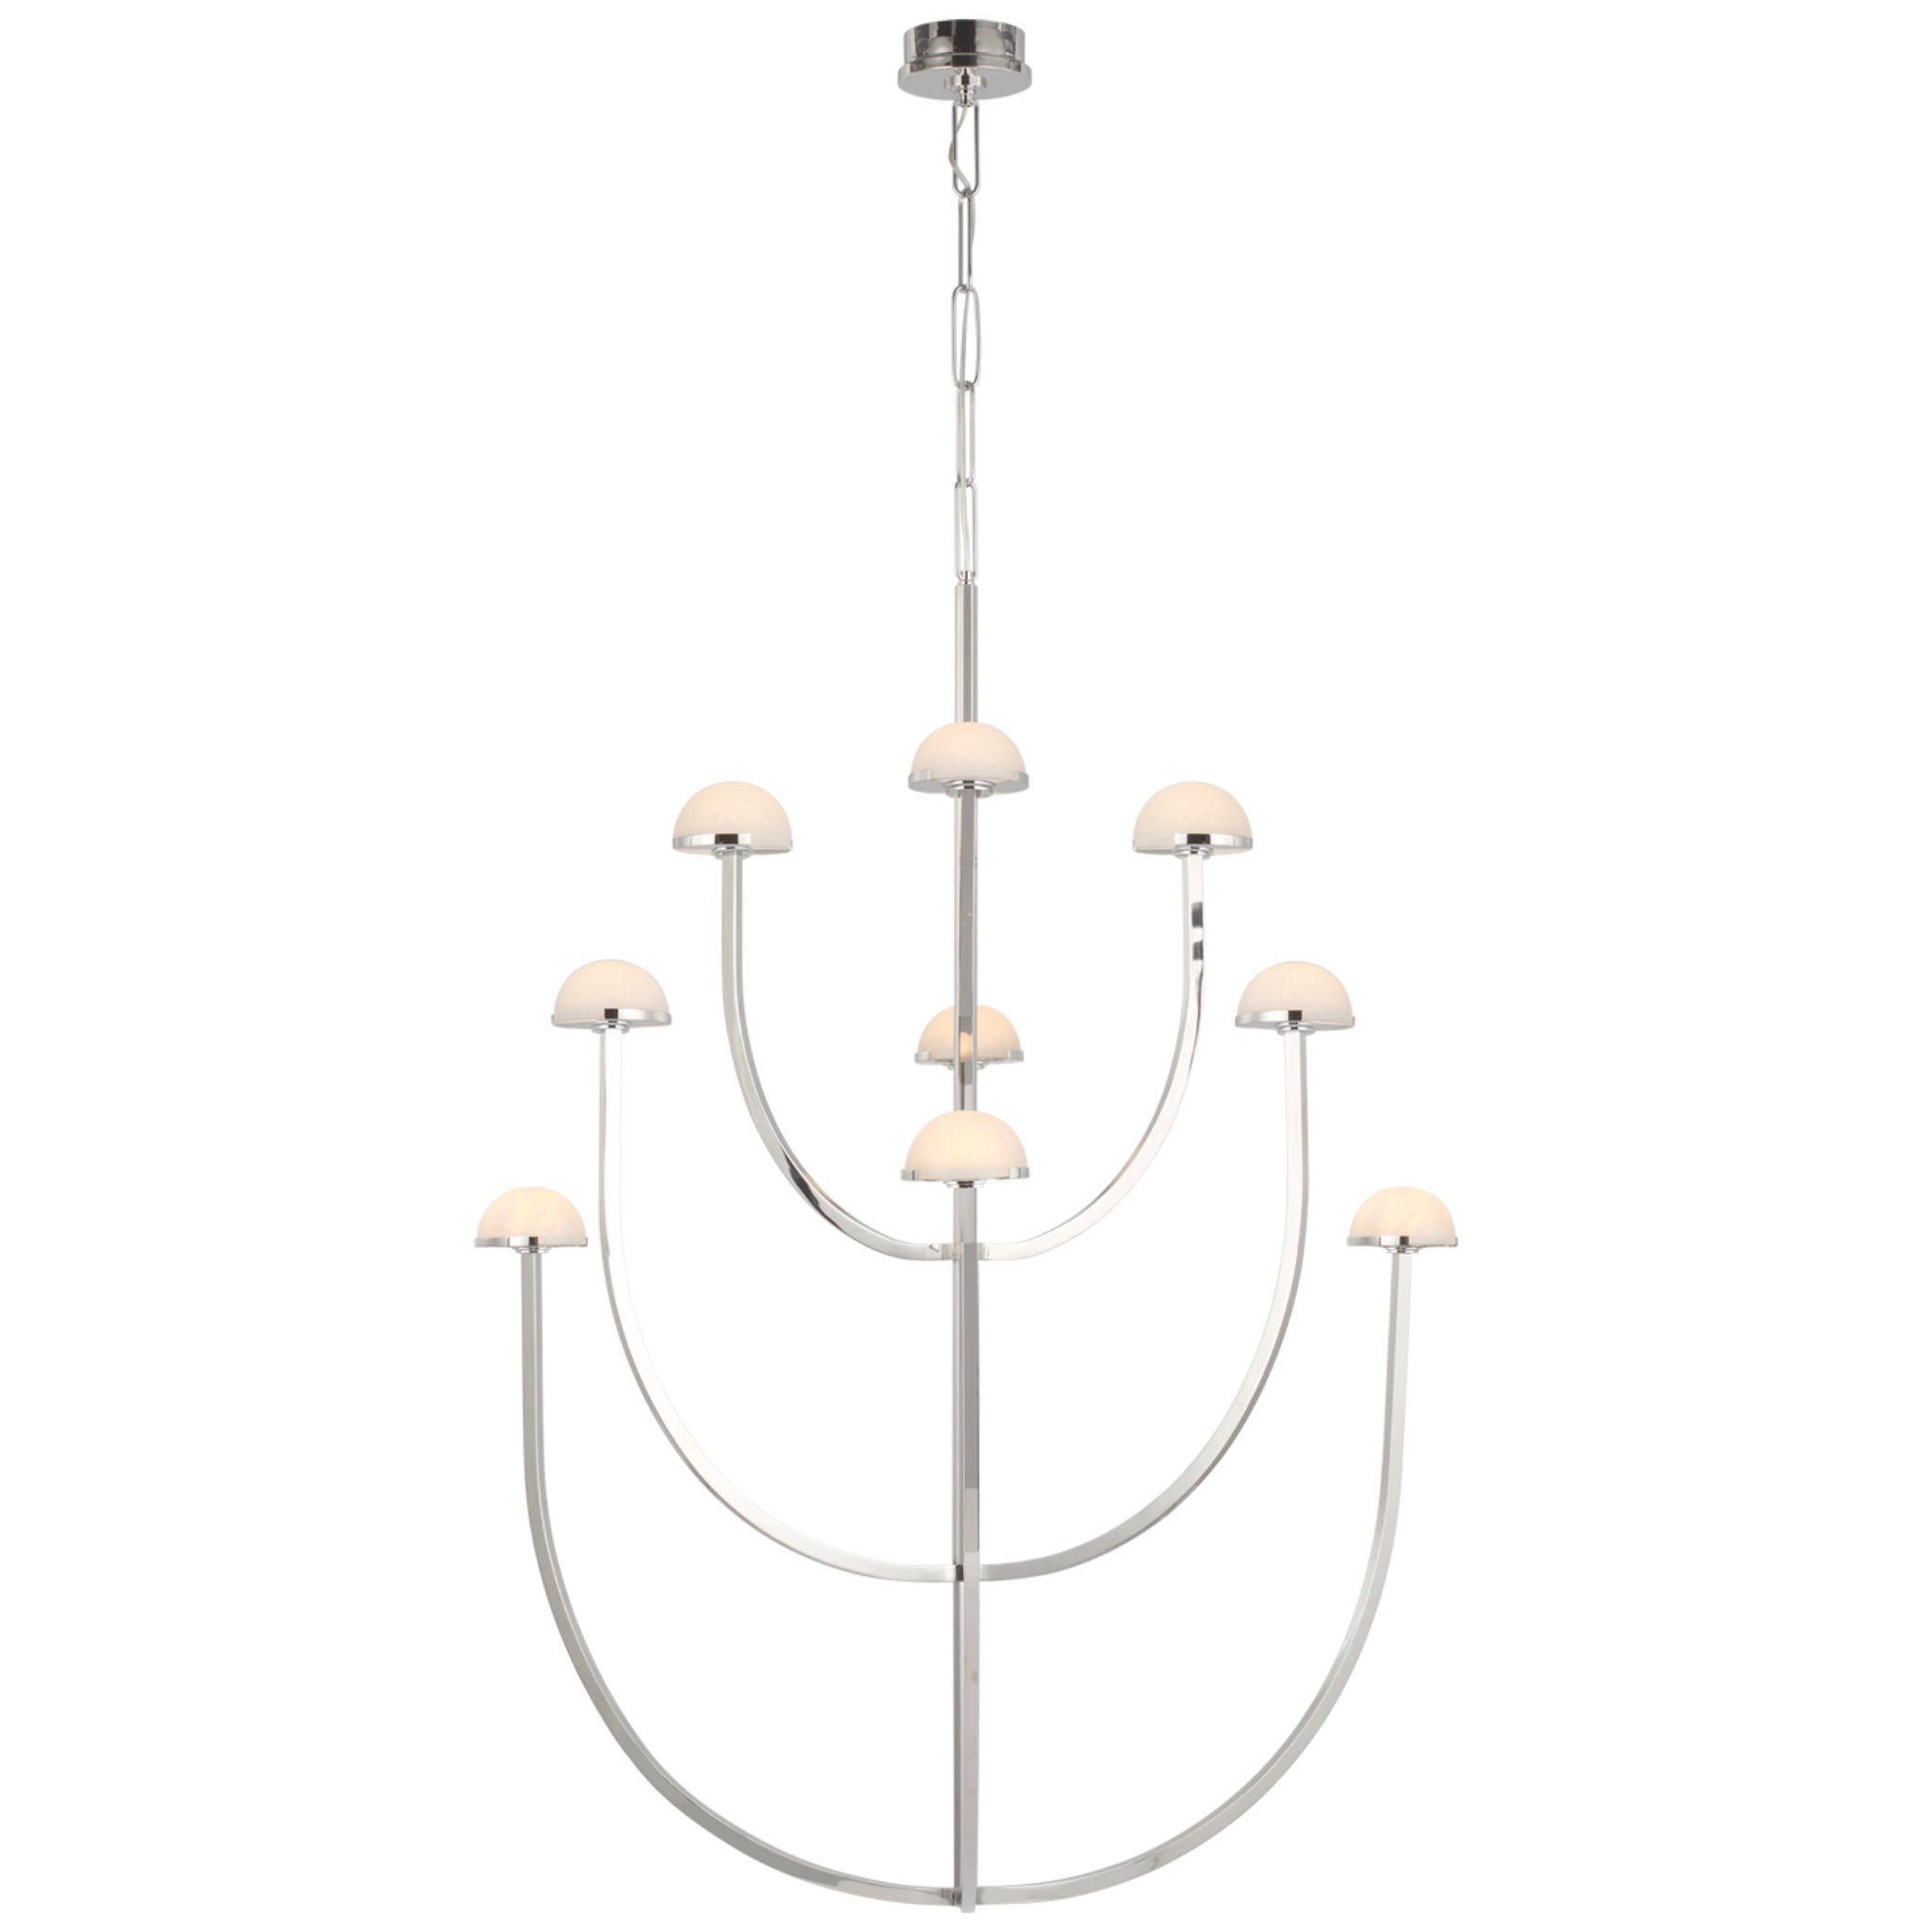 Kelly Wearstler Pedra X-Large Three-Tier Chandelier in Polished Nickel with Alabaster